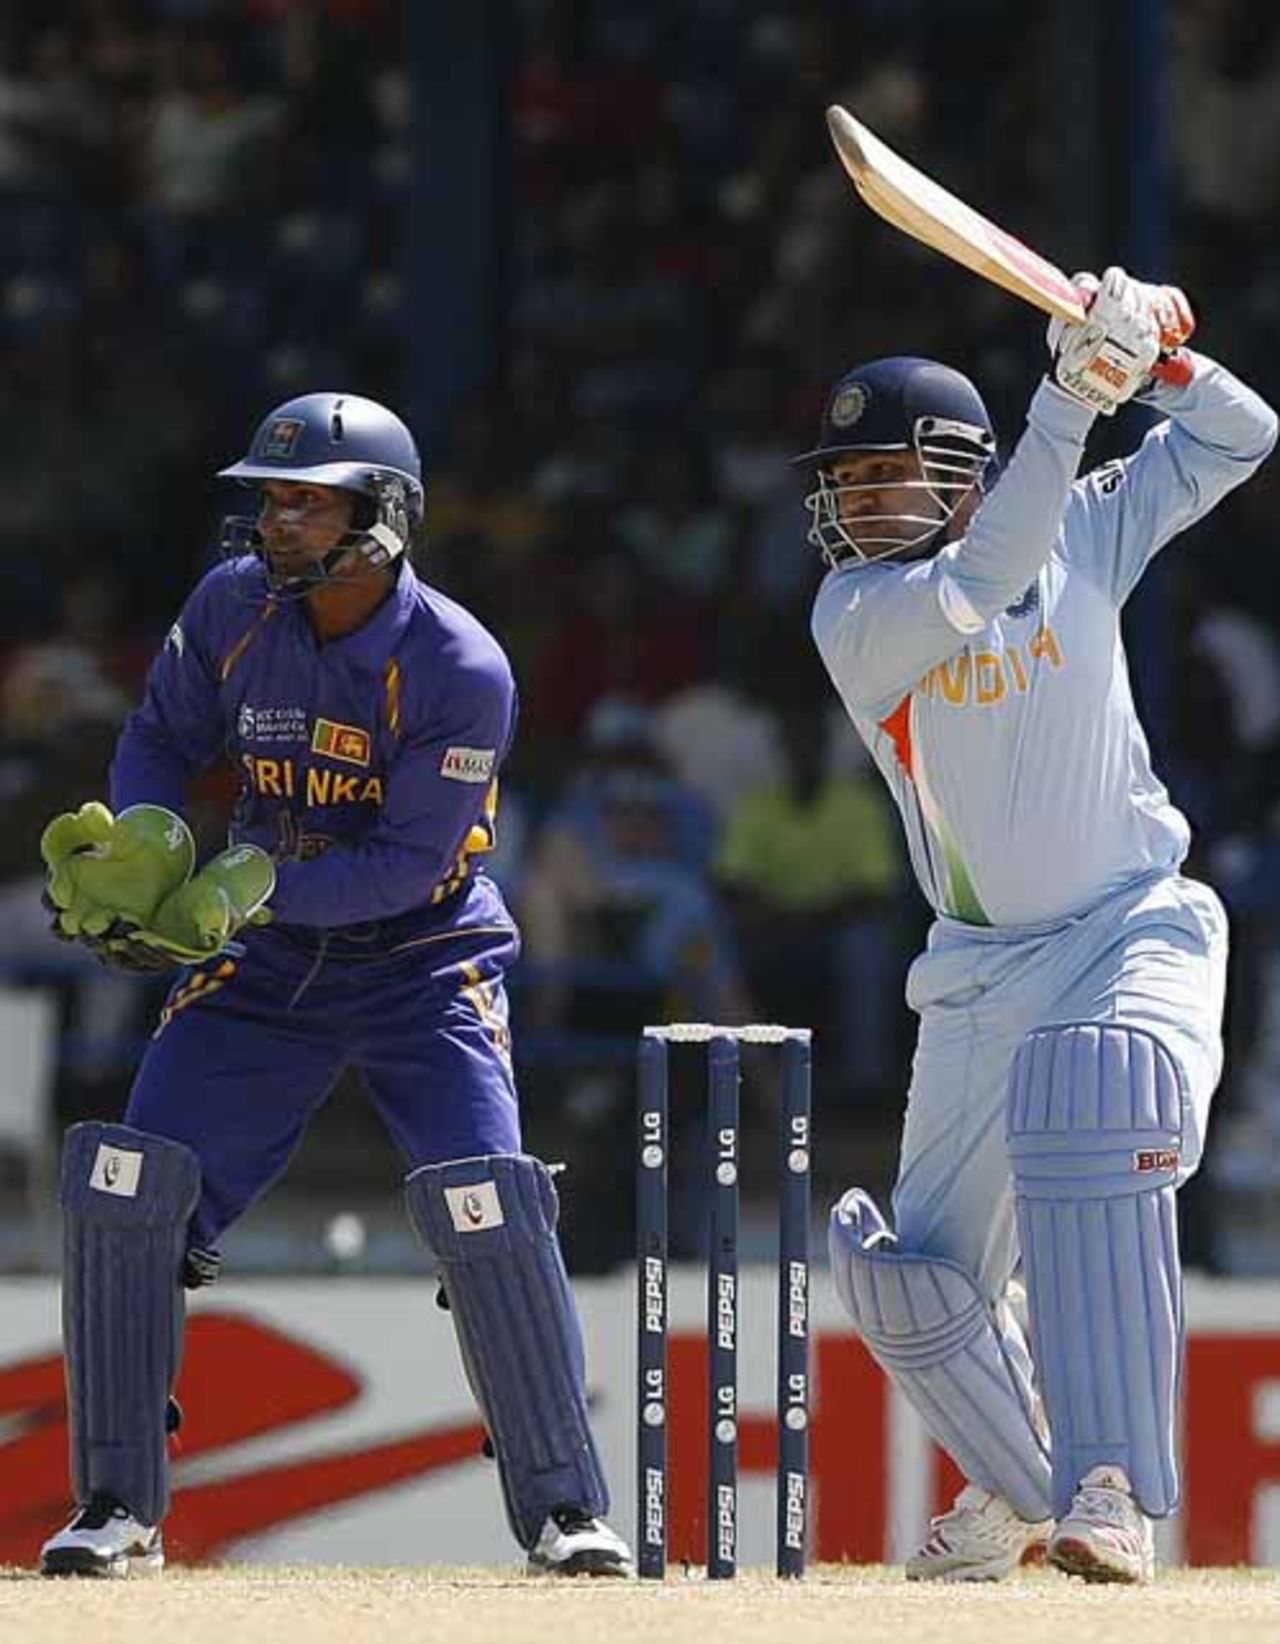 Virender Sehwag drives to the off during his innings of 48, India v Sri Lanka, Group B, Trinidad, March 23, 2007